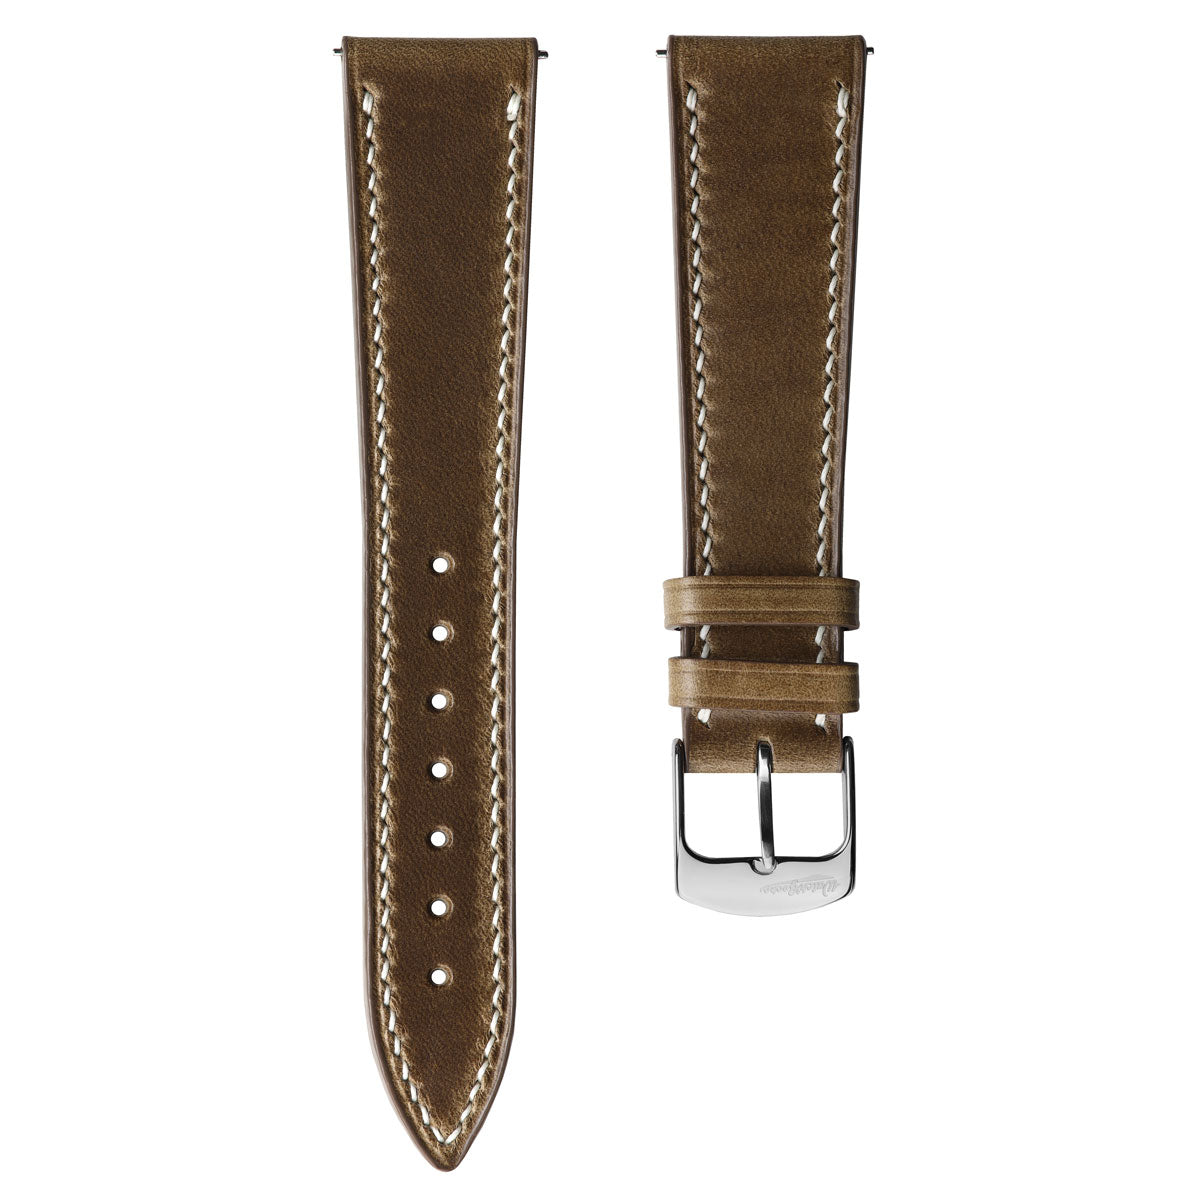 Hanley Horween Chromexcel Leather Watch Strap - Natural Brown